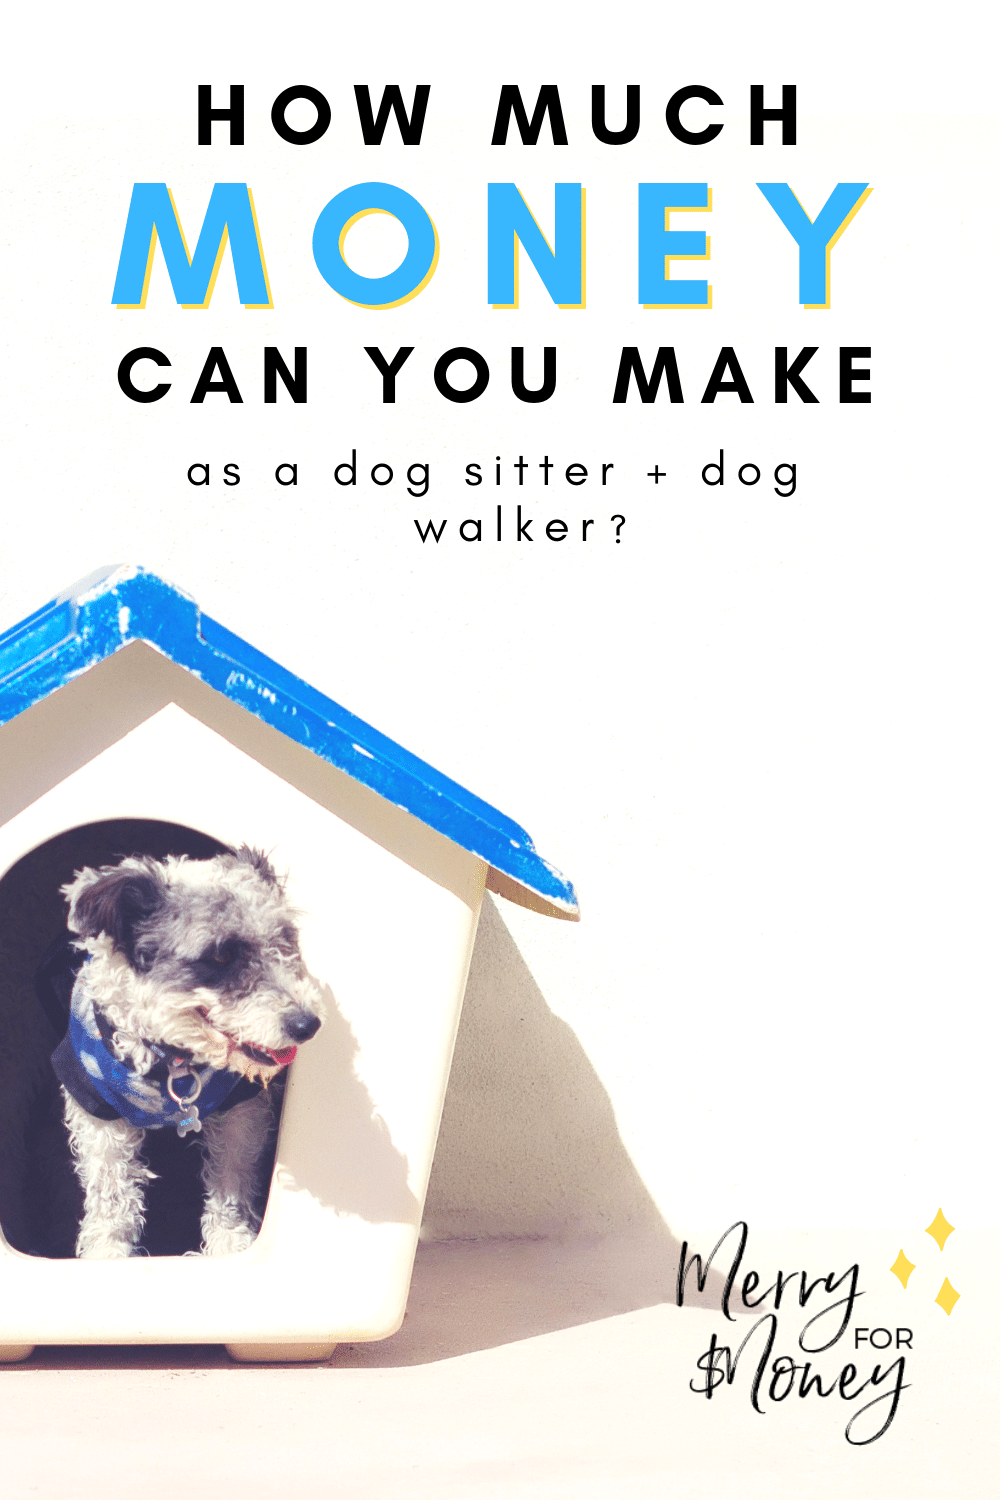 Dog Wlking Rover Logo - How Much Can You Make as a Dog Walker and Dog Sitter? 